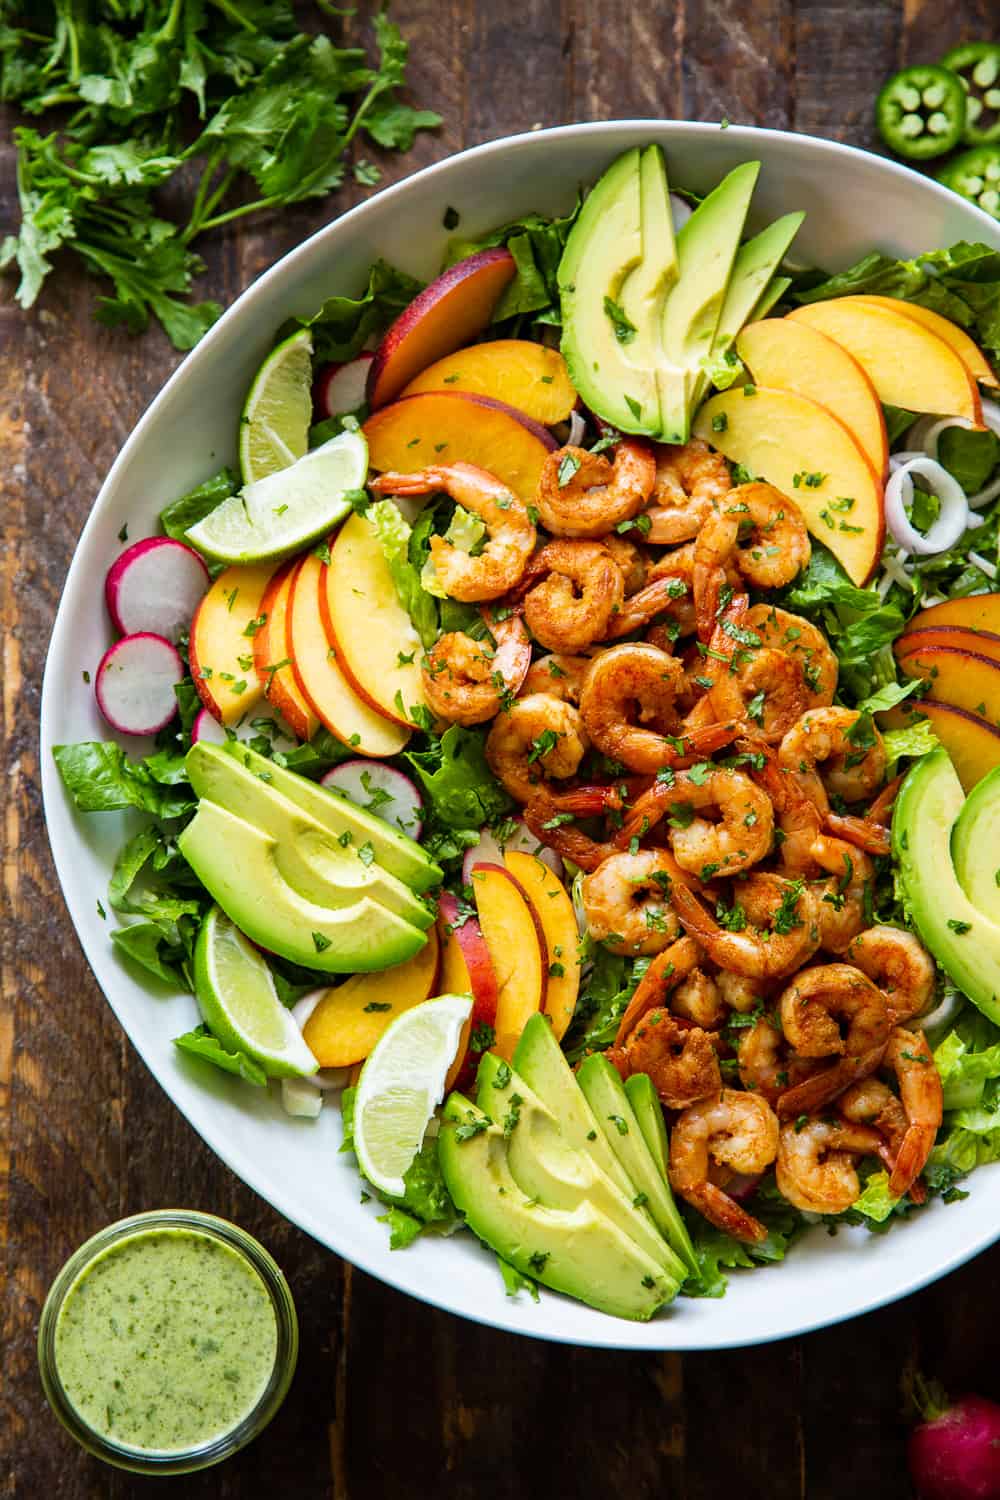 This healthy salad has tons of savory and sweet flavors plus spice! Spicy chipotle shrimp over a fresh summer salad with the most delicious cilantro dressing! Serve it for lunch or dinner over the summer or for your next BBQ. It’s easy to throw together and paleo friendly with a Whole30 option. #paleo #cleaneating #shrimp #whole30